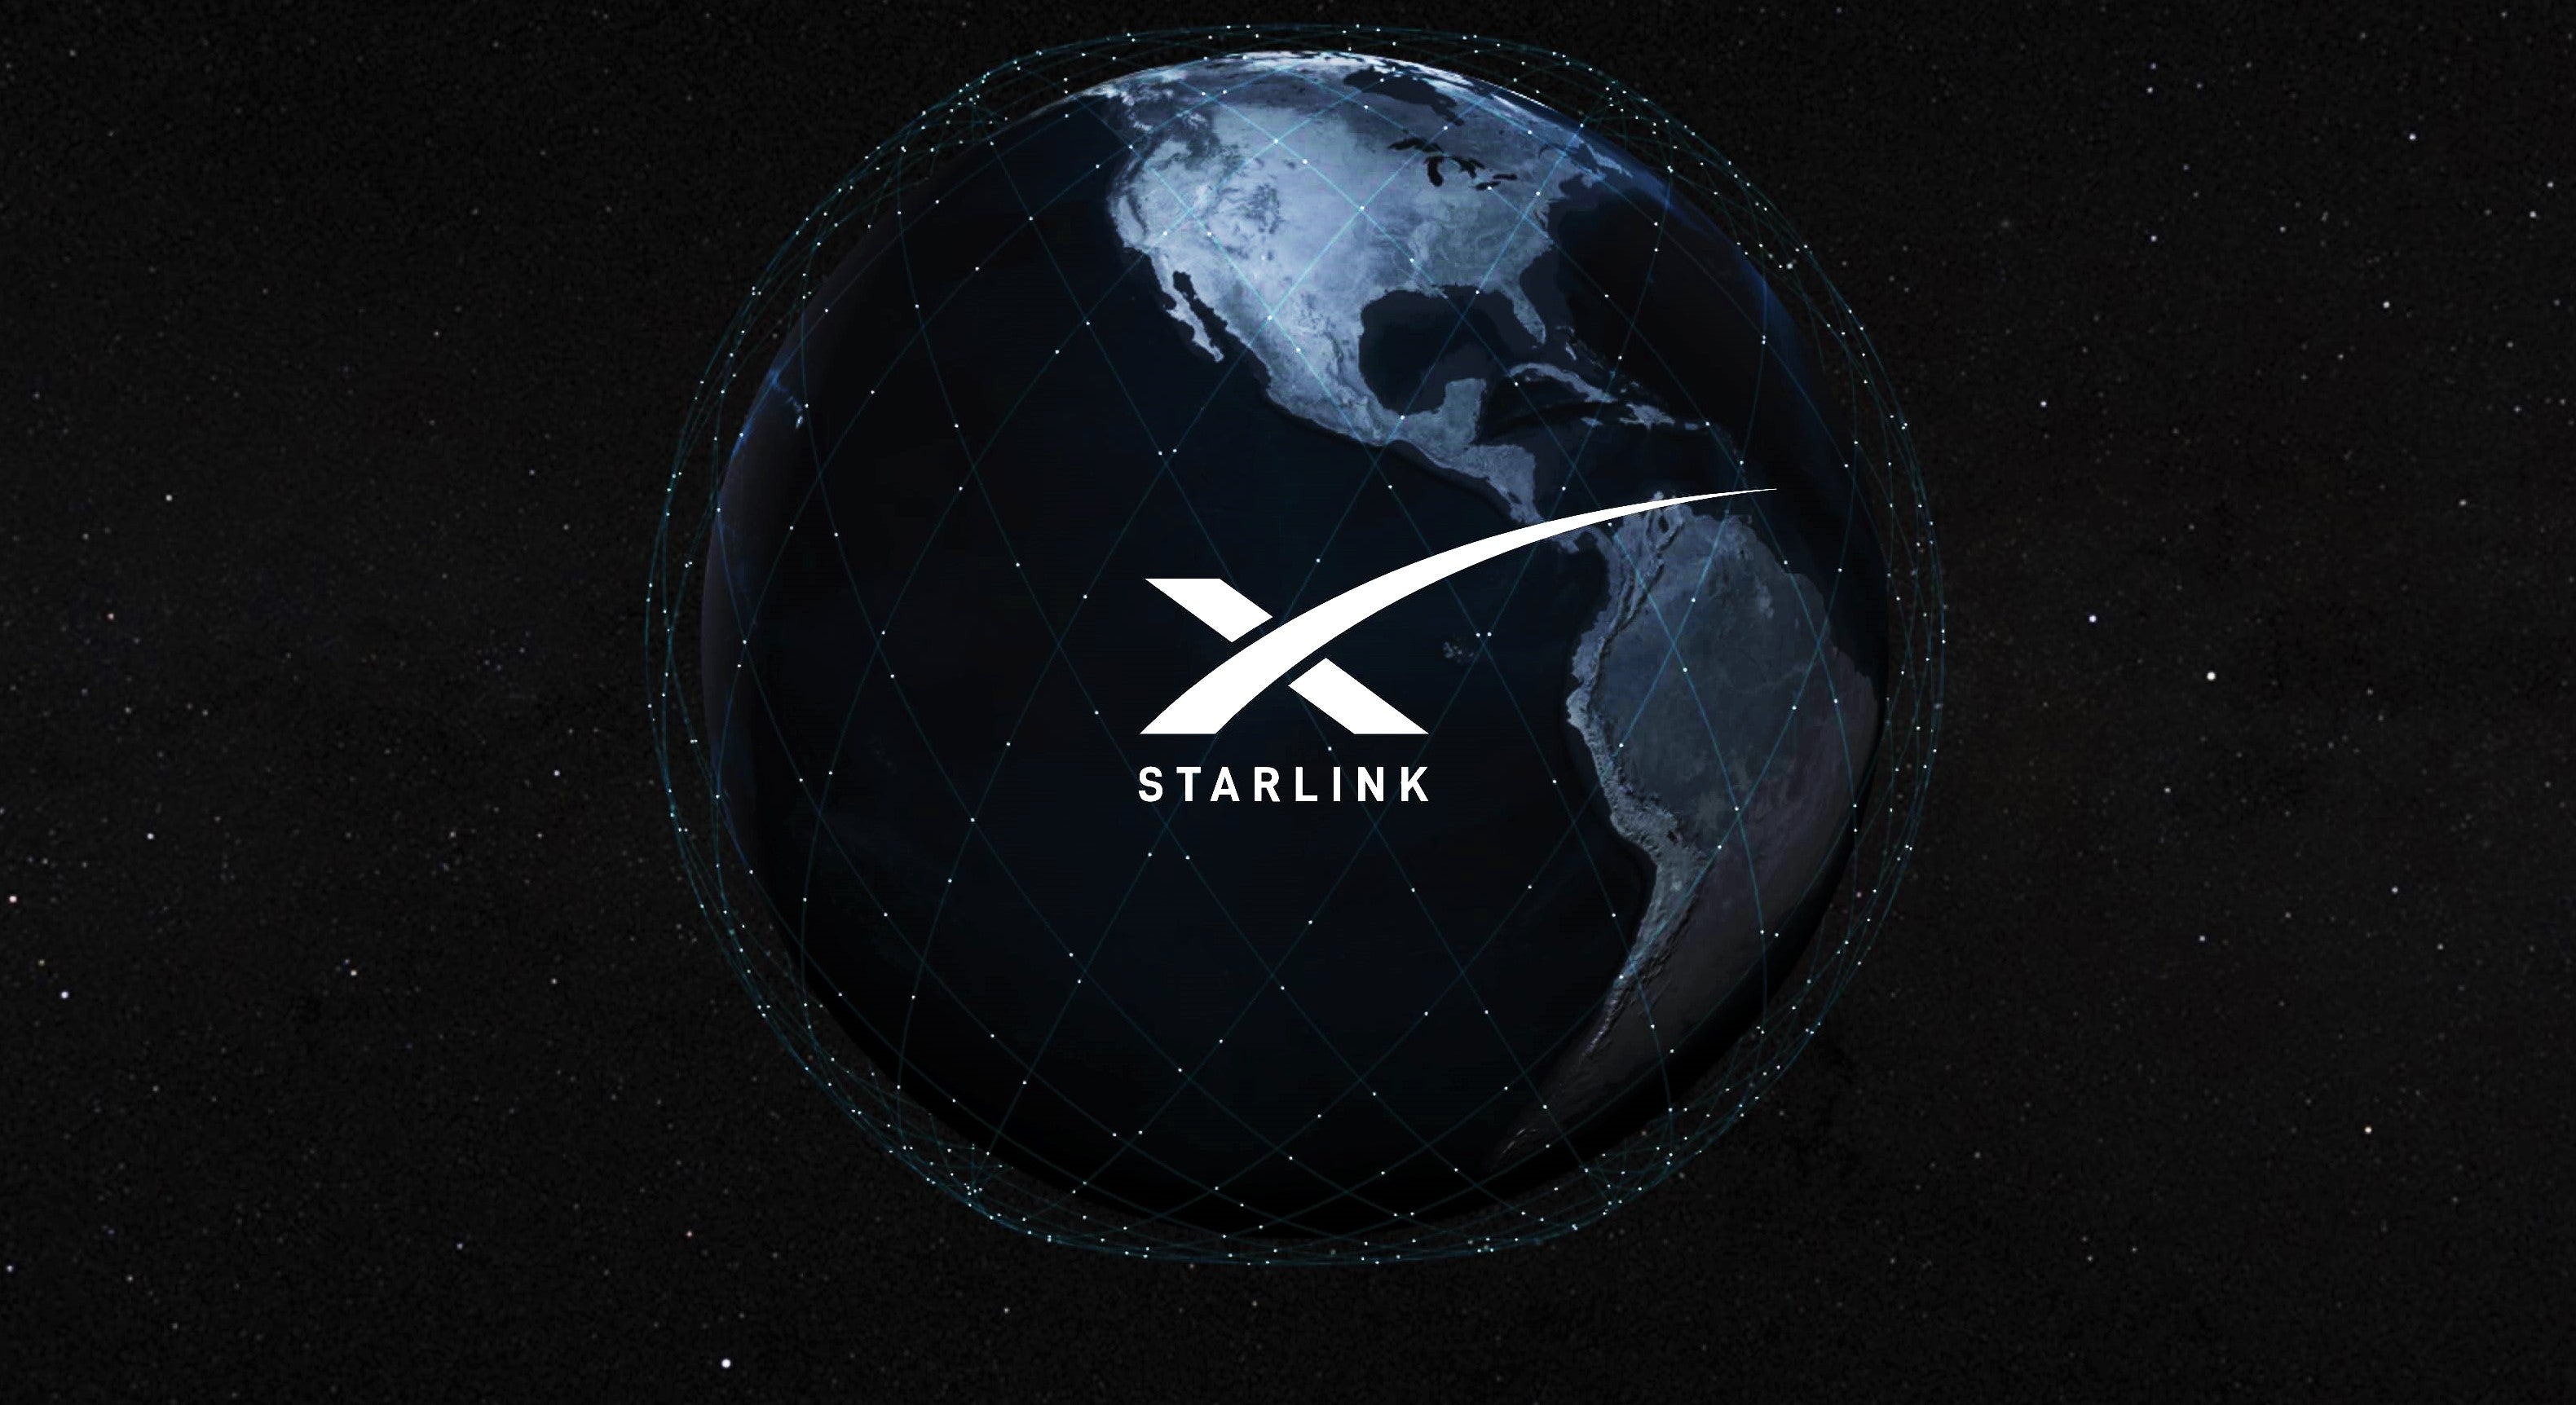 SpaceX aims to conduct public Starlink beta testing in six months